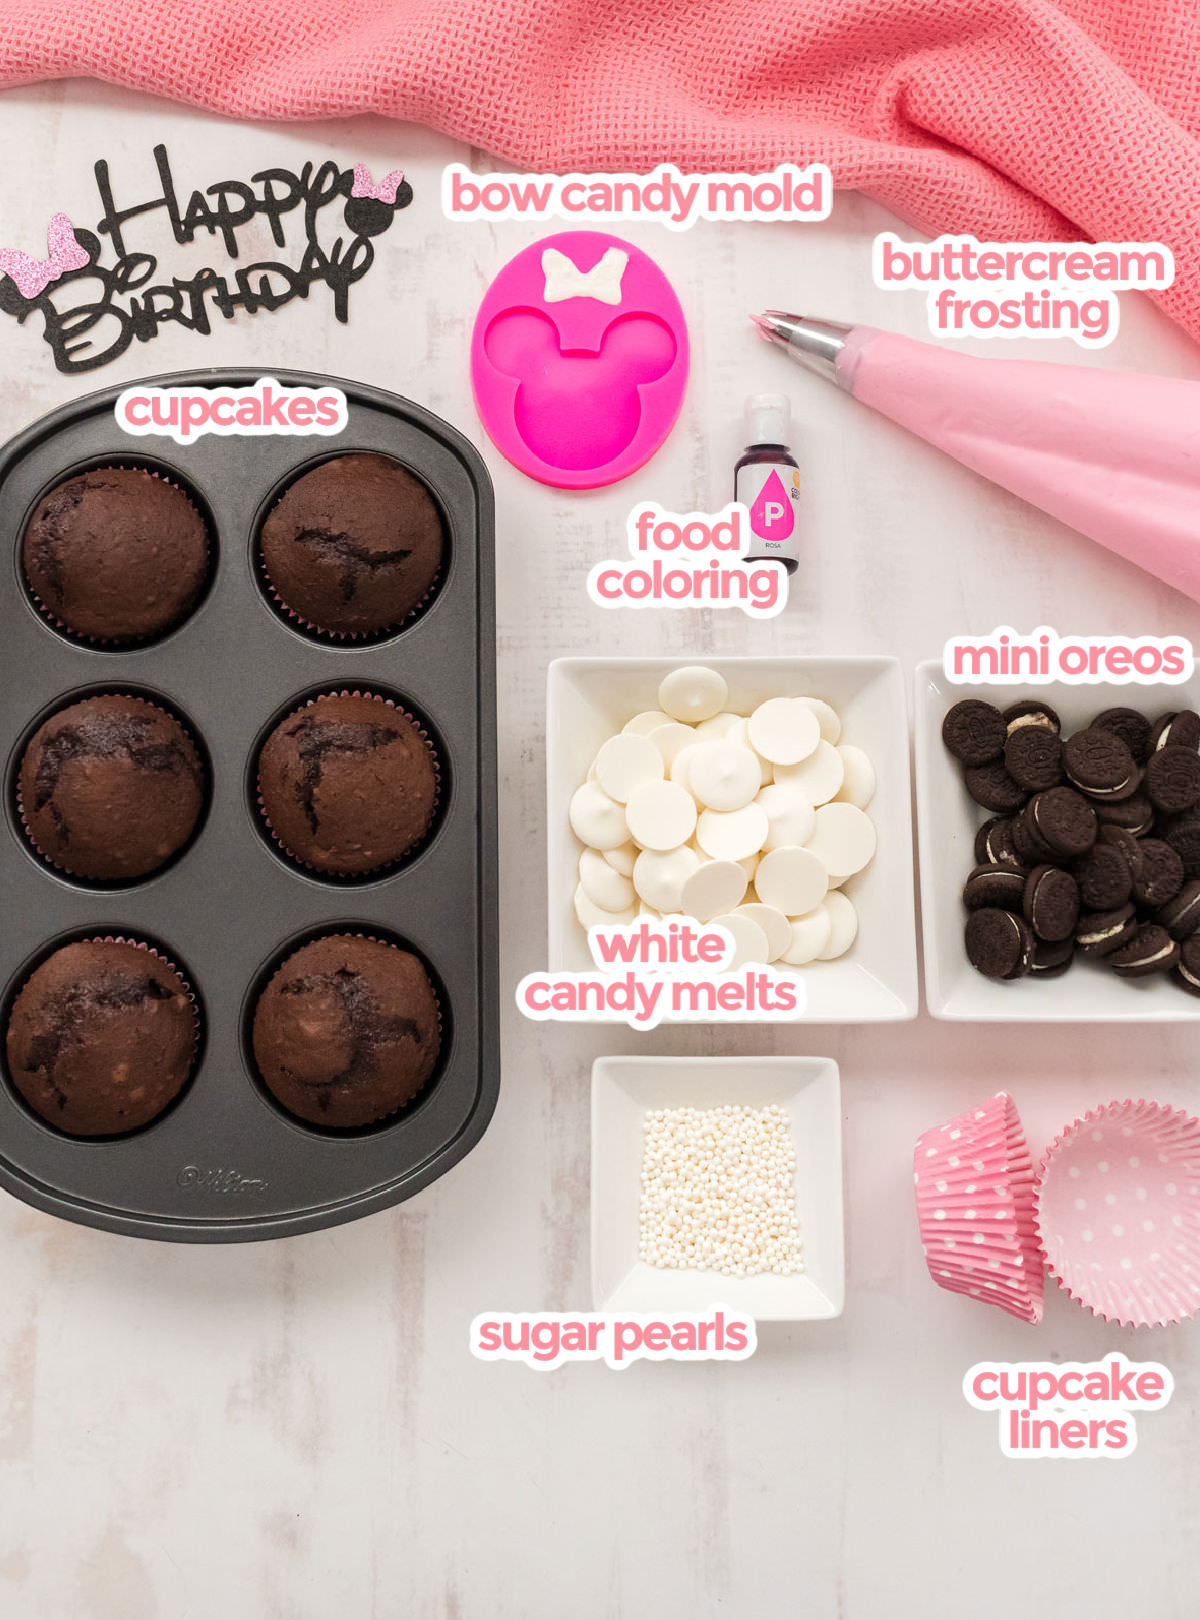 All the ingredients you will need to make Minnie Mouse Cupcakes including cupcakes, buttercream frosting, bow candy mold, white candy melts, mini oreos and sugar pearls.